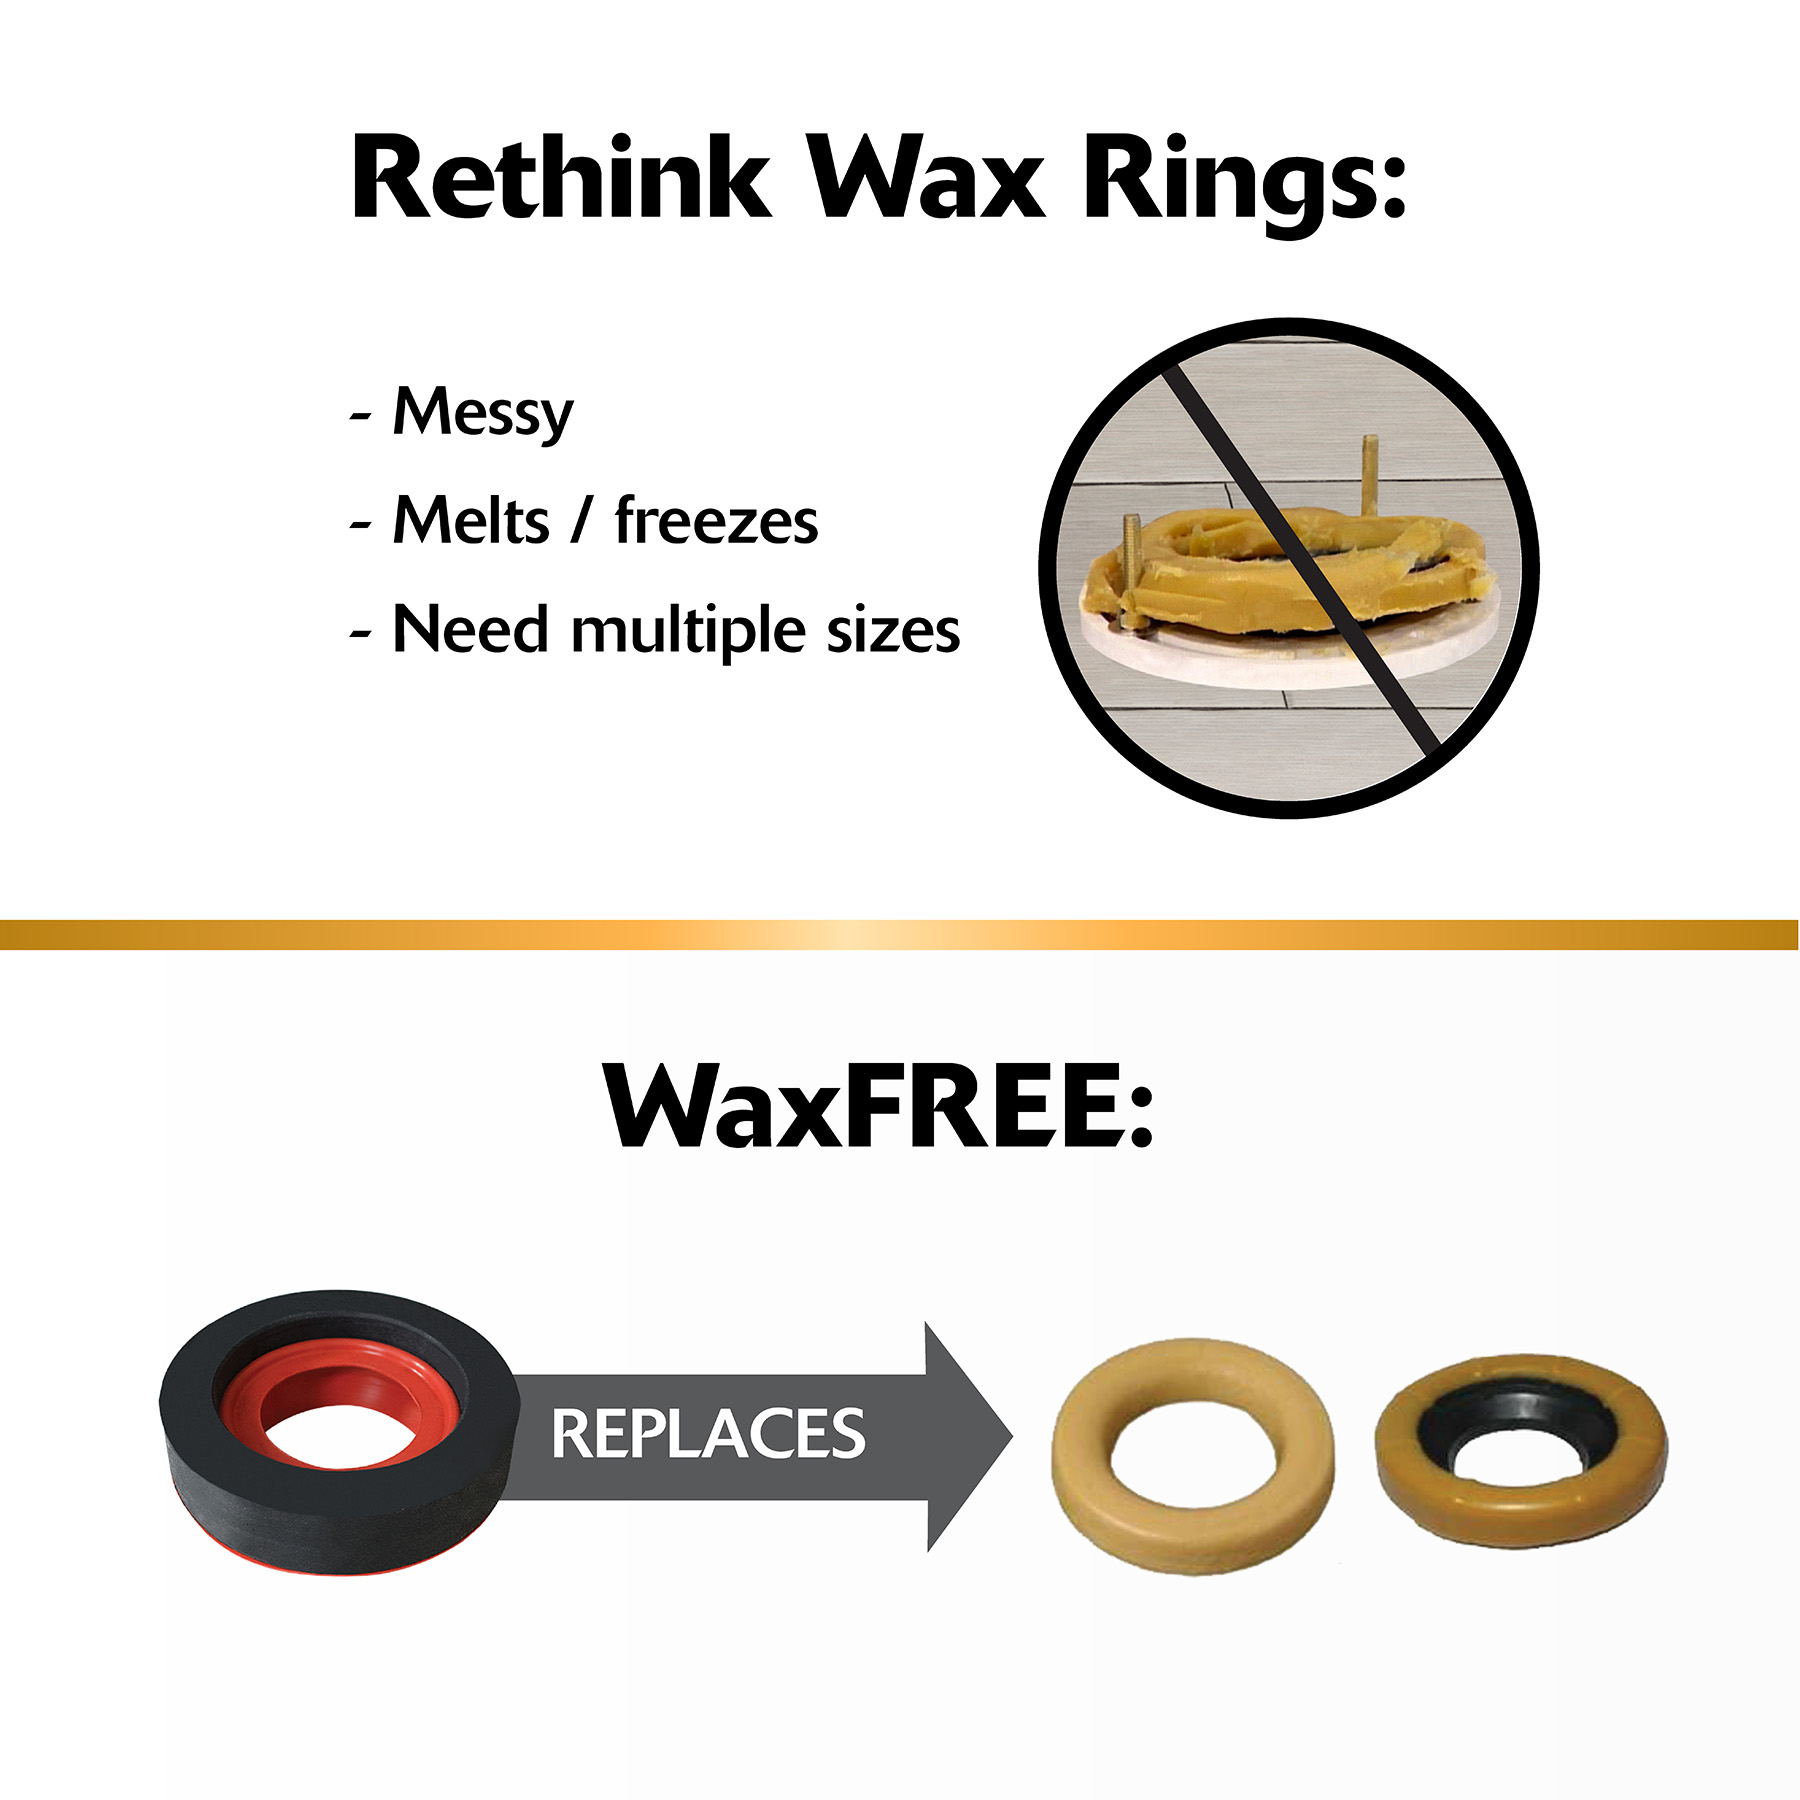 Wax Free Seals Replace Messy Wax Rings